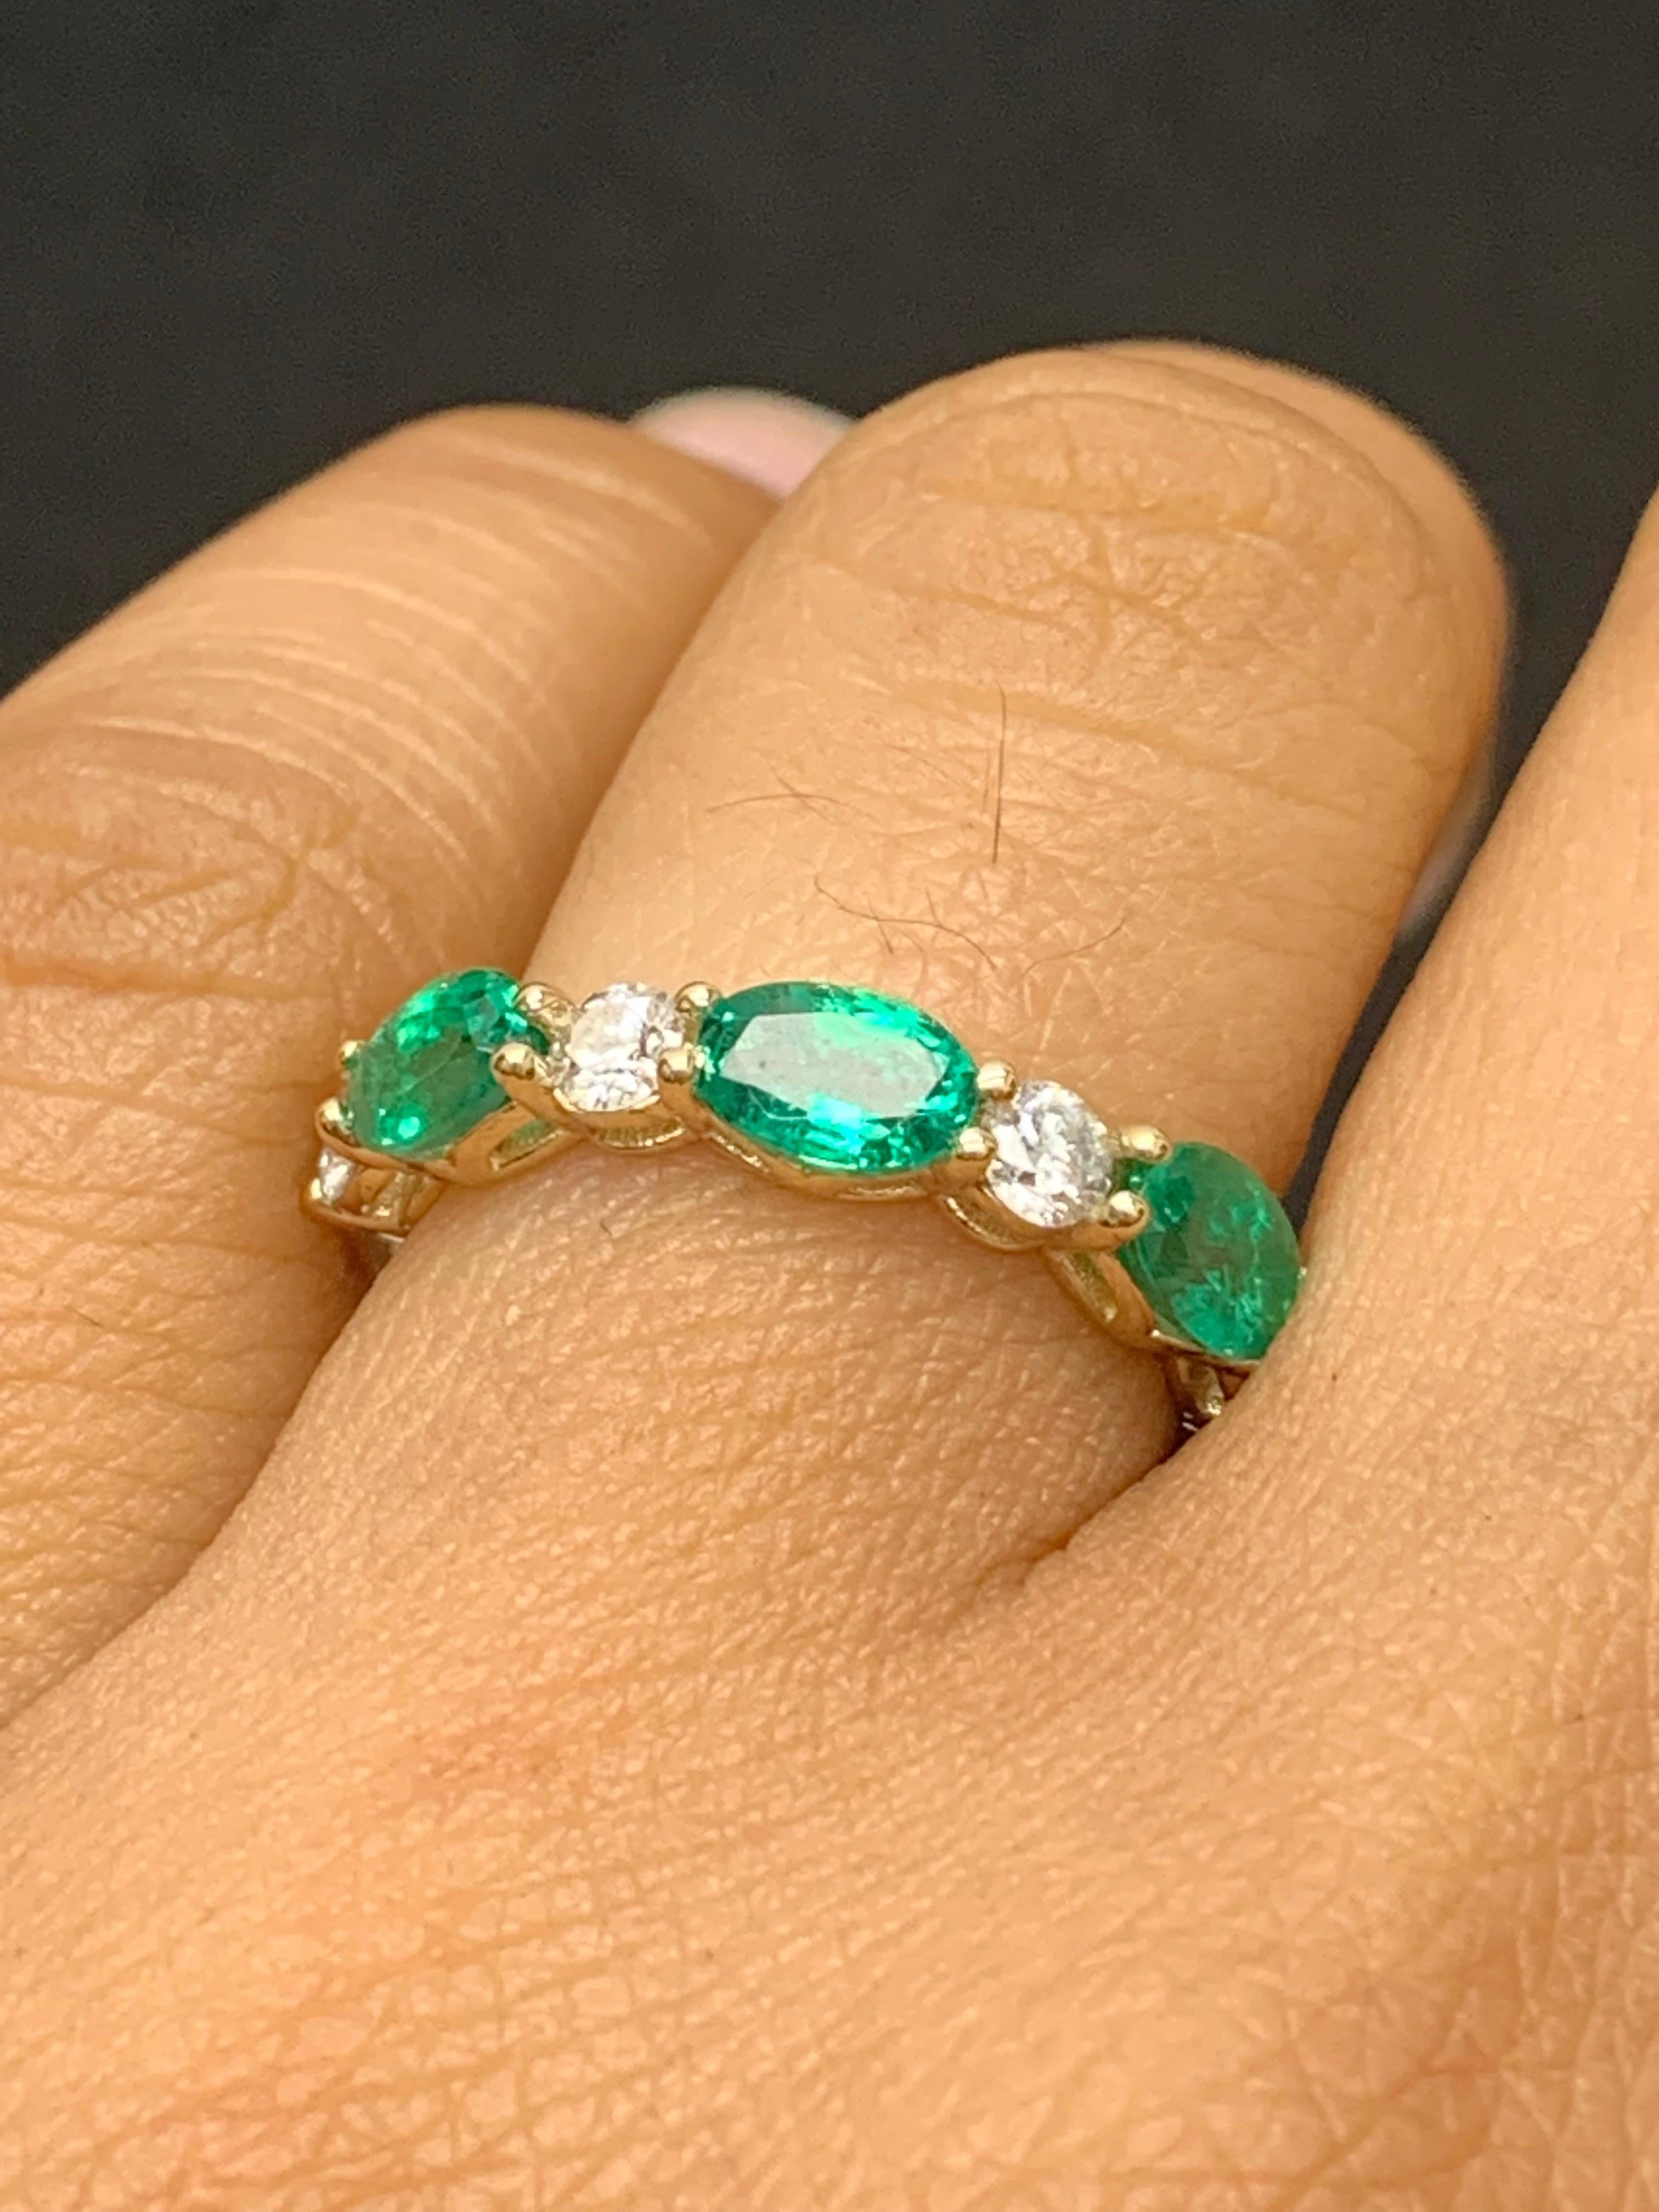 Handcrafted to perfection; showcasing color-rich oval cut emeralds that elegantly alternate round diamonds in a 14k Yellow gold setting. 
The 3 emeralds weigh 1.27 carats total and 4 diamonds weigh 0.61 carats total.

Size 6.5 US (Sizable). One of a